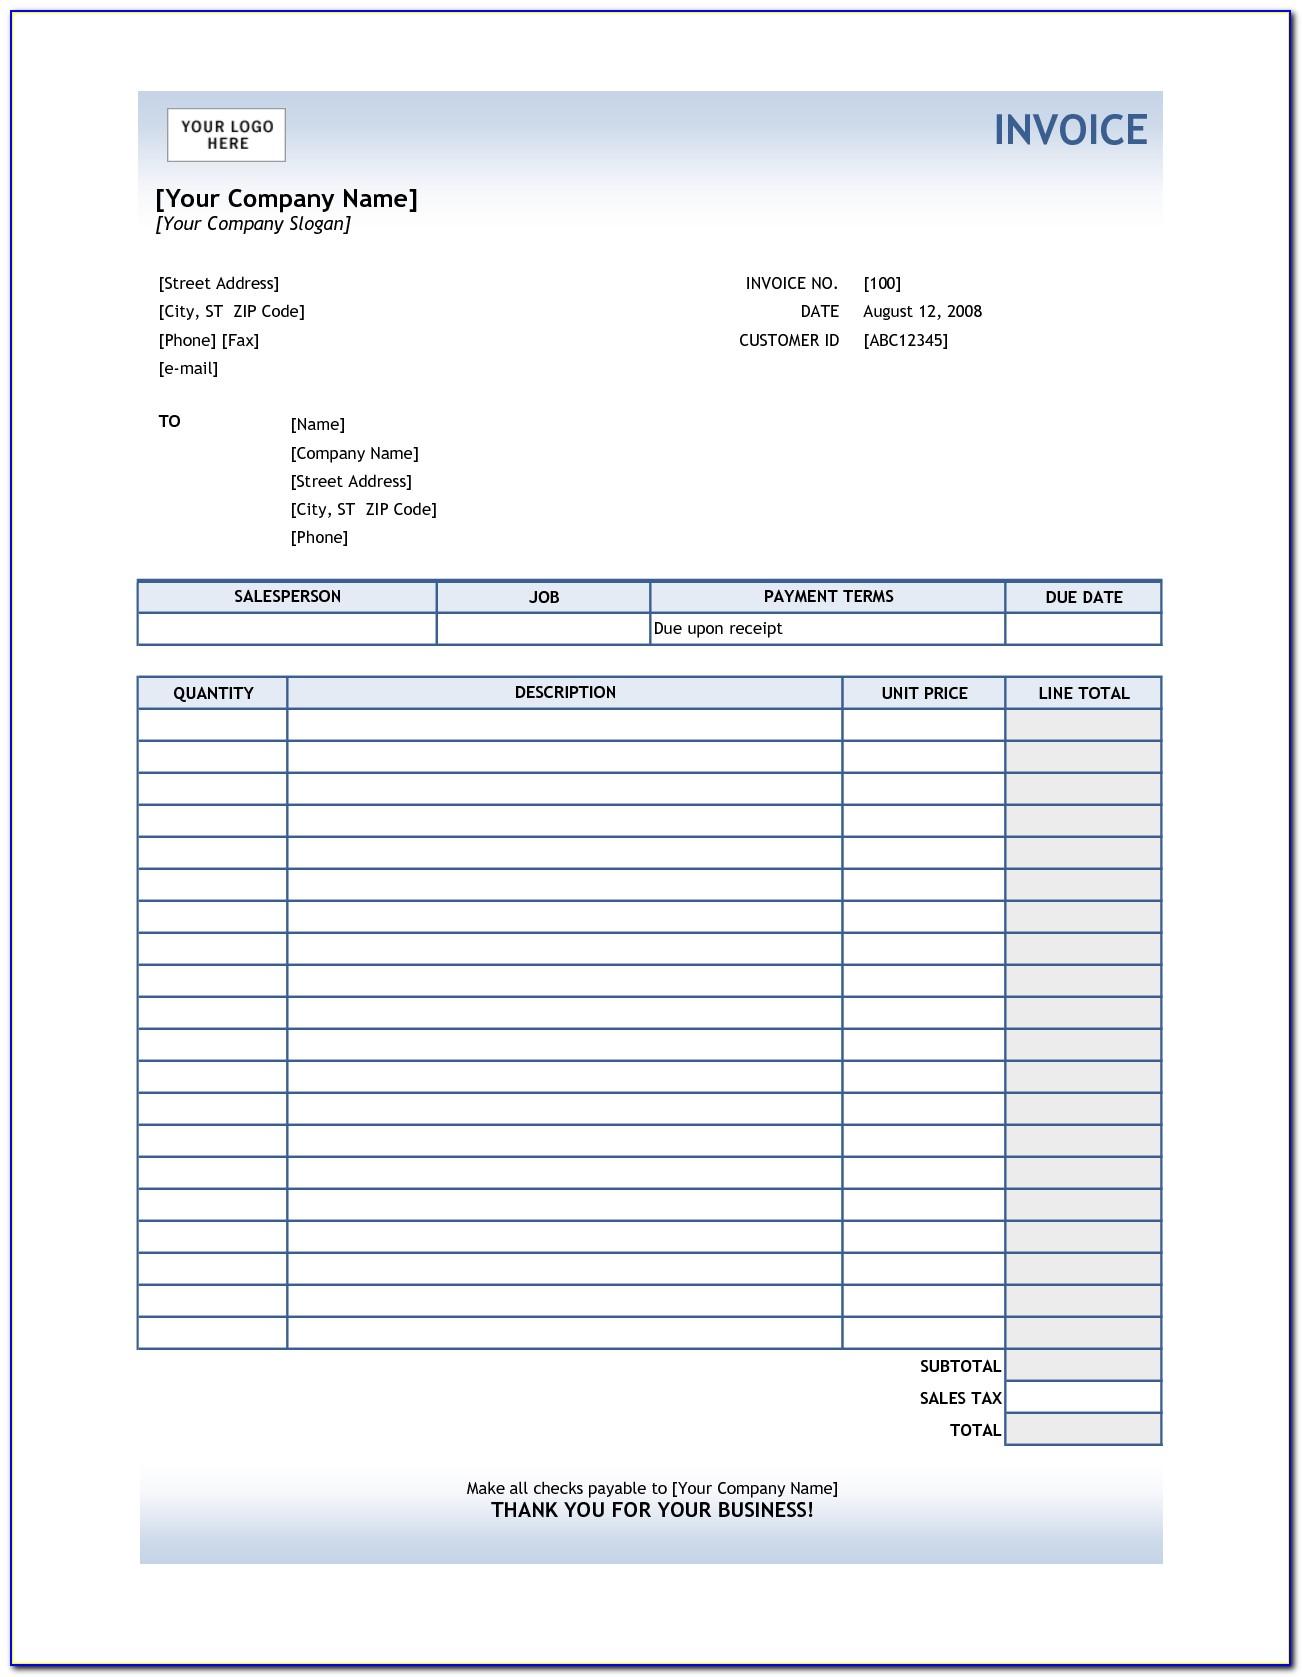 Free Service Invoice Template Excel